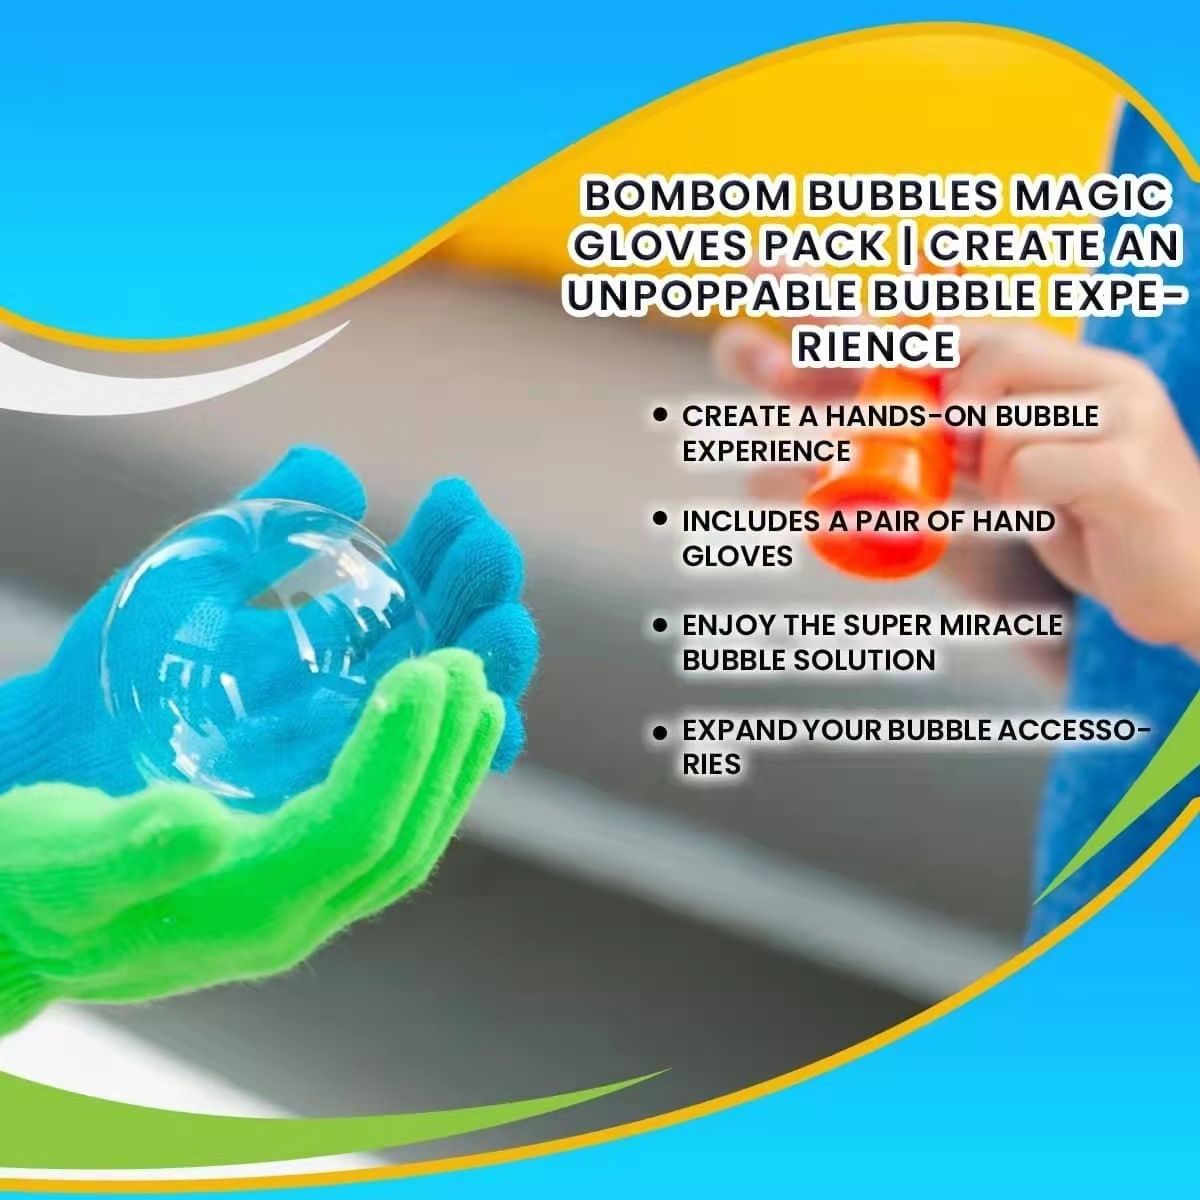 Bubble Glove, Blower & Tray. STEM Toy with bubbles